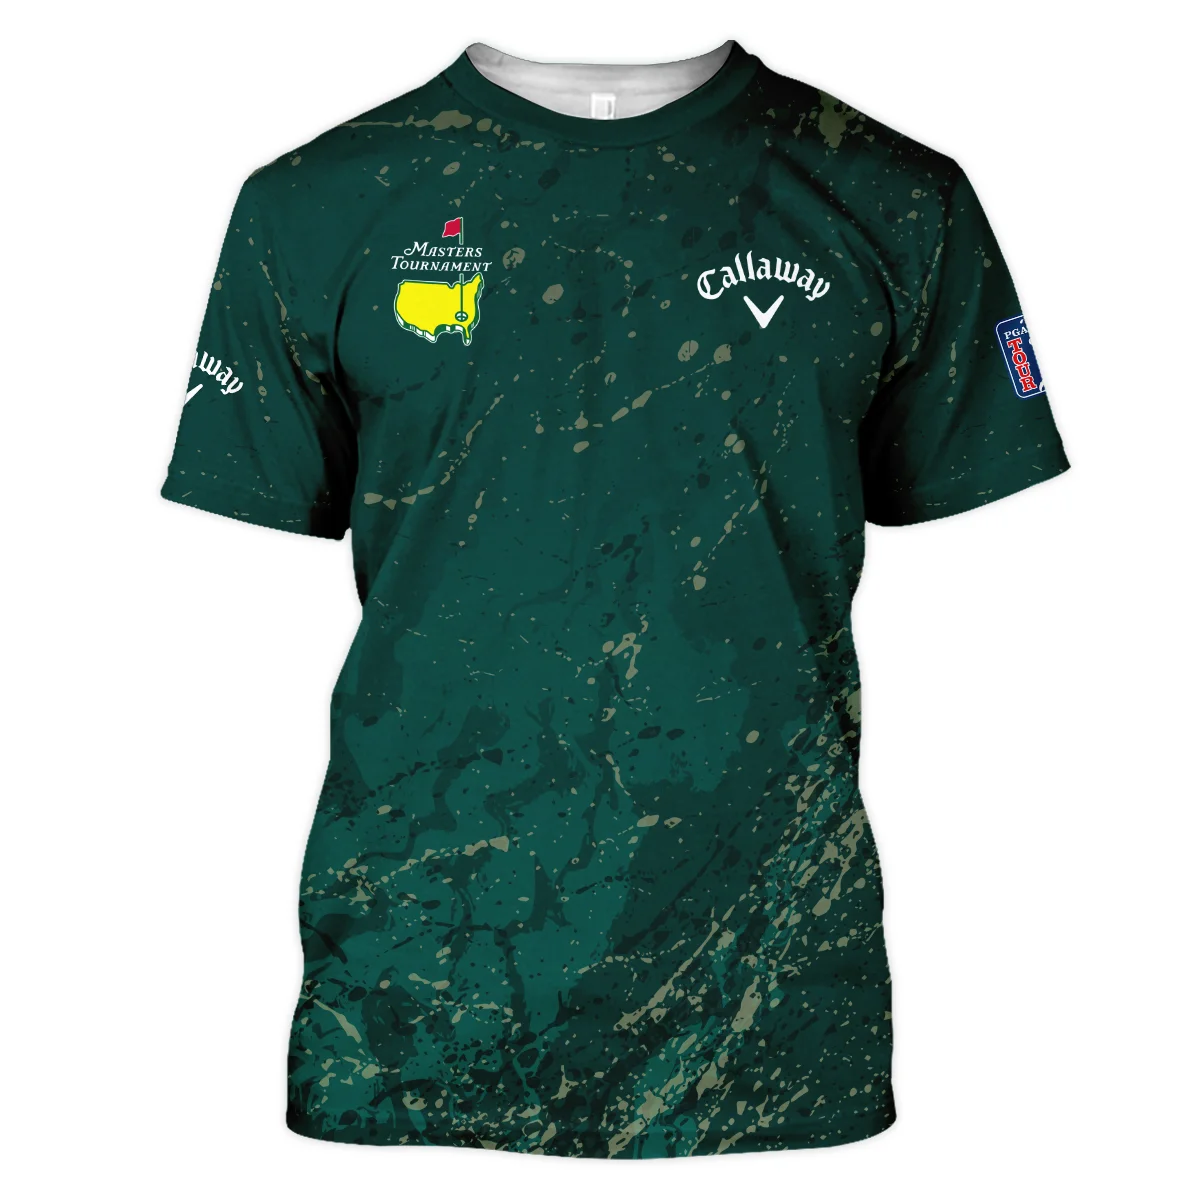 Old Cracked Texture With Gold Splash Paint Masters Tournament Callaway Unisex T-Shirt Style Classic T-Shirt